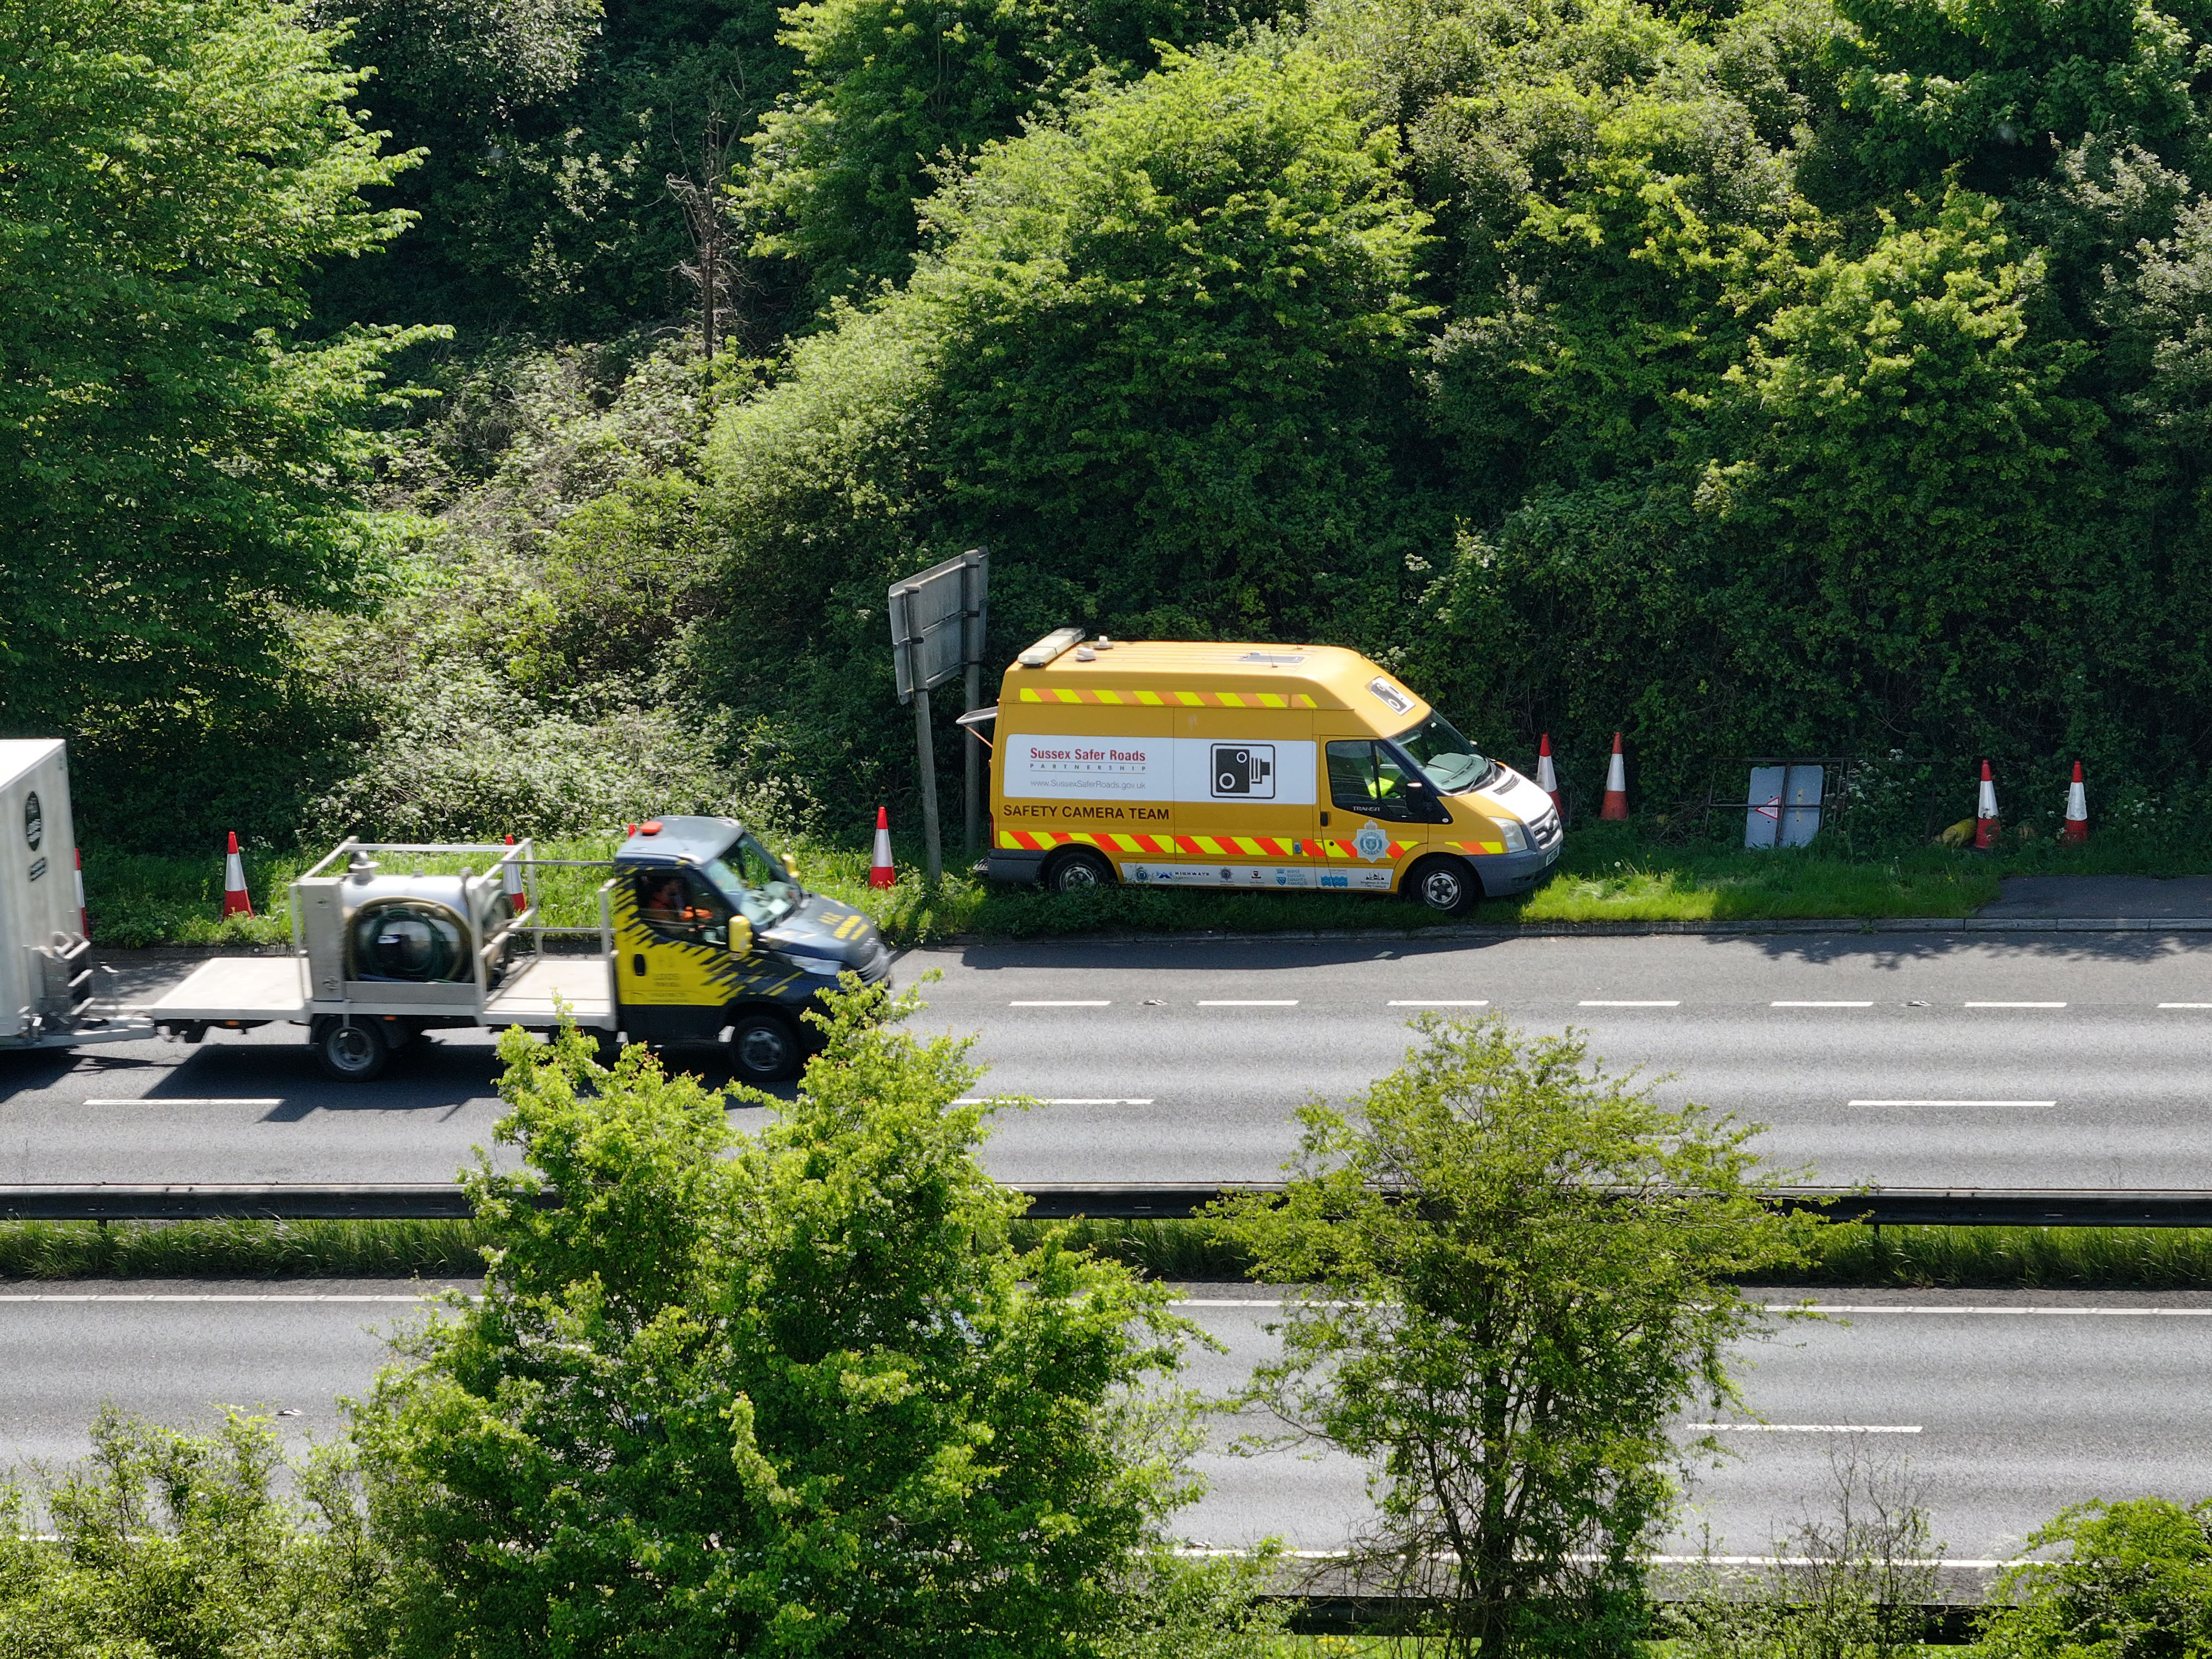 The Sussex Safer Road Partnership emphasised the use of the van is a completely legal form of surveillance